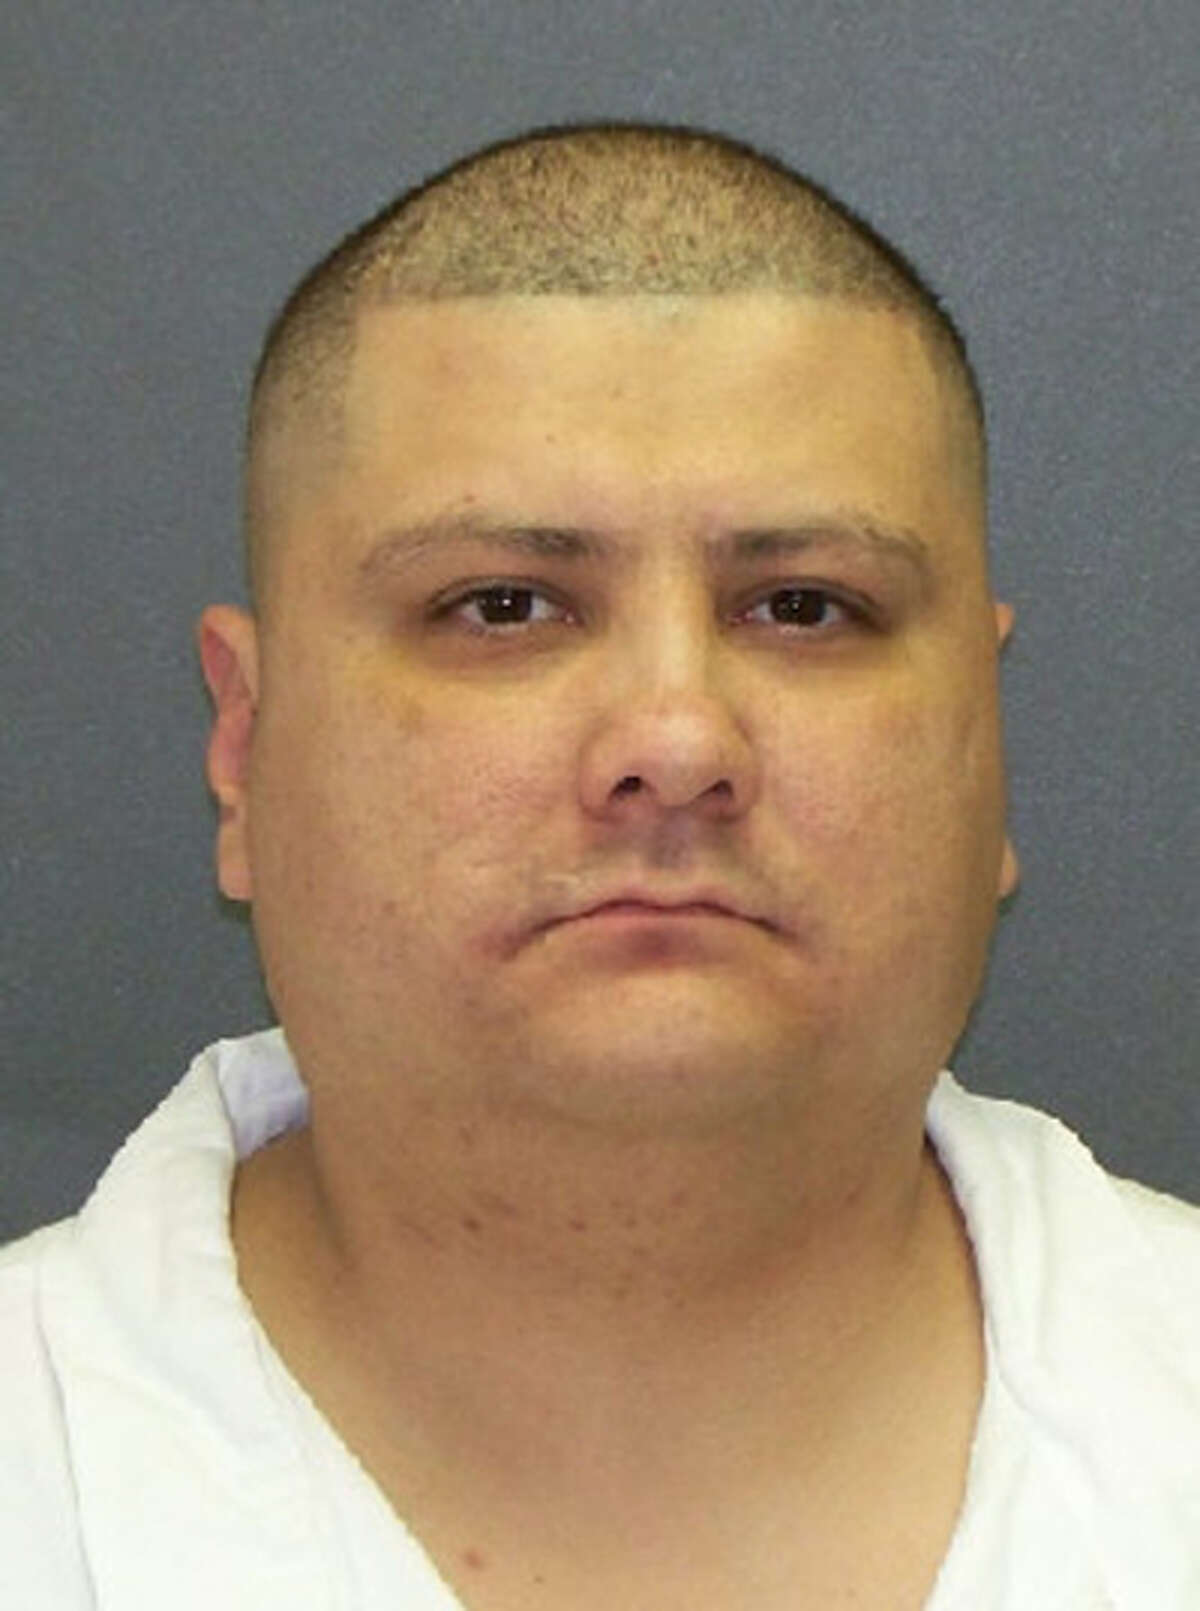 Gilbert Flores, 41, was shot and killed by Bexar County sheriff's deputies.